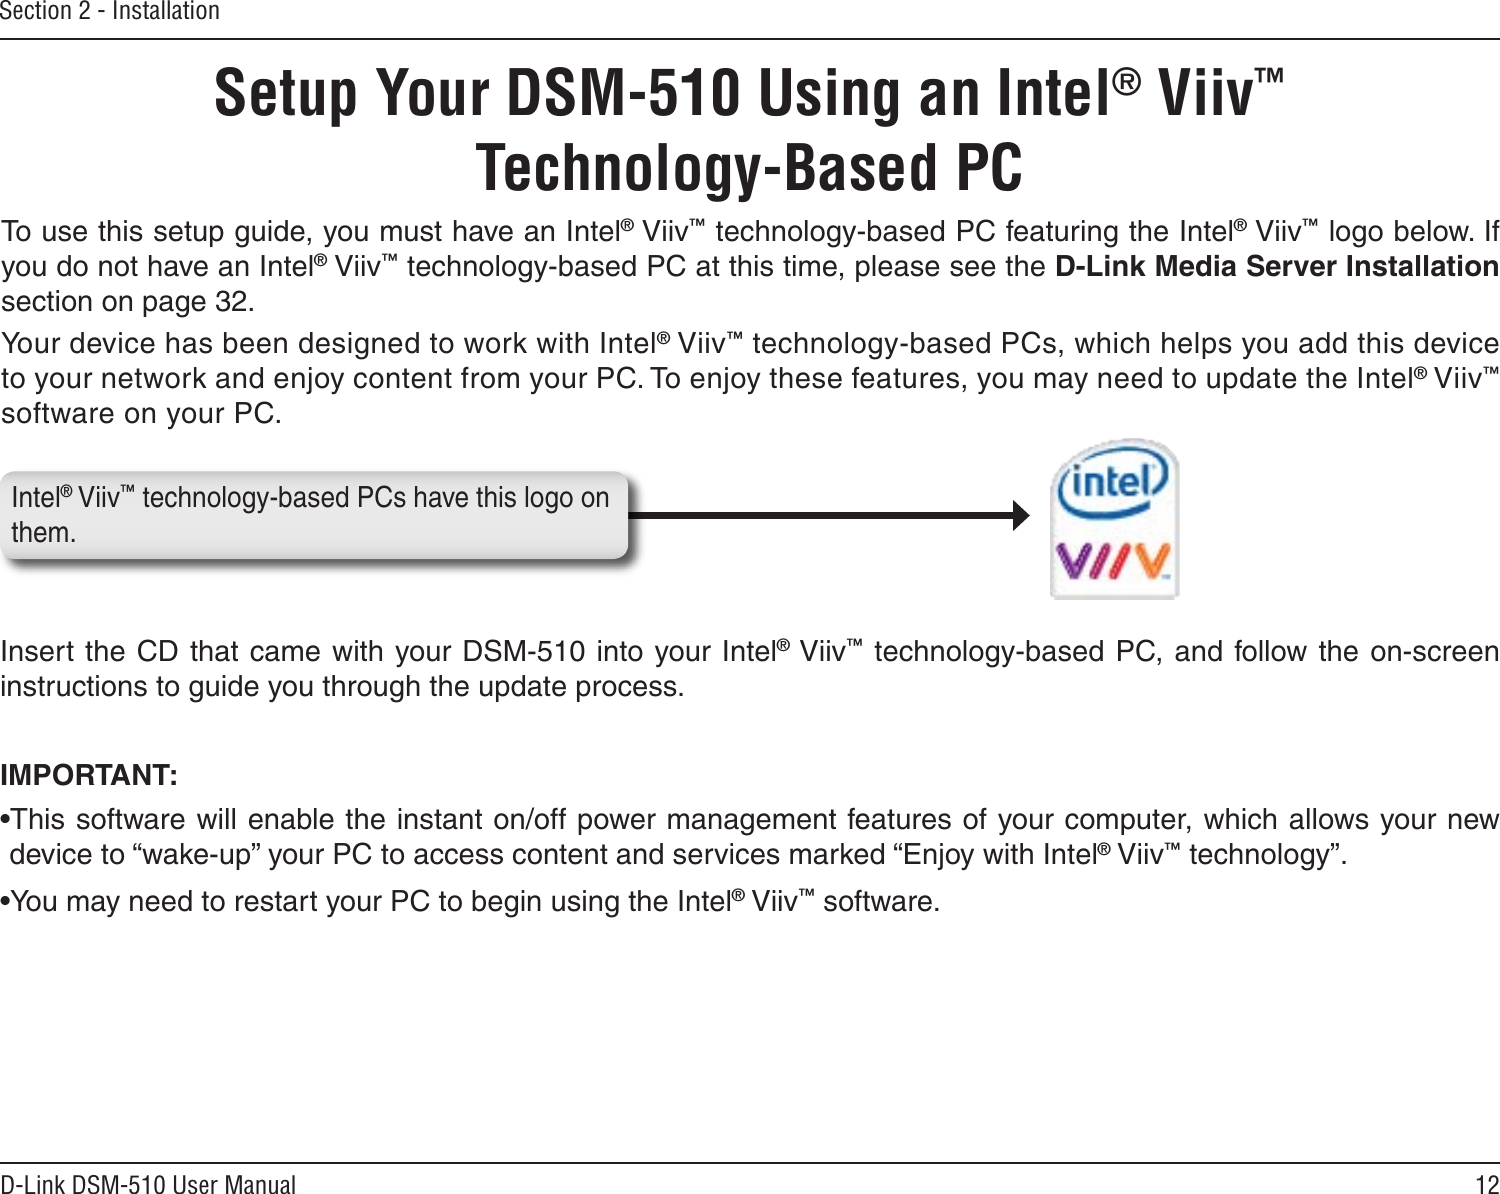 12D-Link DSM-510 User ManualSection 2 - InstallationIntel® Viiv™ technology-based PCs have this logo on them. Setup Your DSM-510 Using an Intel® Viiv™  Technology-Based PCTo use this setup guide, you must have an Intel® Viiv™ technology-based PC featuring the Intel® Viiv™ logo below. If you do not have an Intel® Viiv™ technology-based PC at this time, please see the D-Link Media Server Installation section on page 32.Your device has been designed to work with Intel® Viiv™ technology-based PCs, which helps you add this device to your network and enjoy content from your PC. To enjoy these features, you may need to update the Intel® Viiv™ software on your PC.Insert the CD that came with your DSM-510 into your Intel® Viiv™ technology-based PC, and follow the on-screen instructions to guide you through the update process.IMPORTANT: •This software will enable the instant on/off power management features of your computer, which allows your new device to “wake-up” your PC to access content and services marked “Enjoy with Intel® Viiv™ technology”.•You may need to restart your PC to begin using the Intel® Viiv™ software.